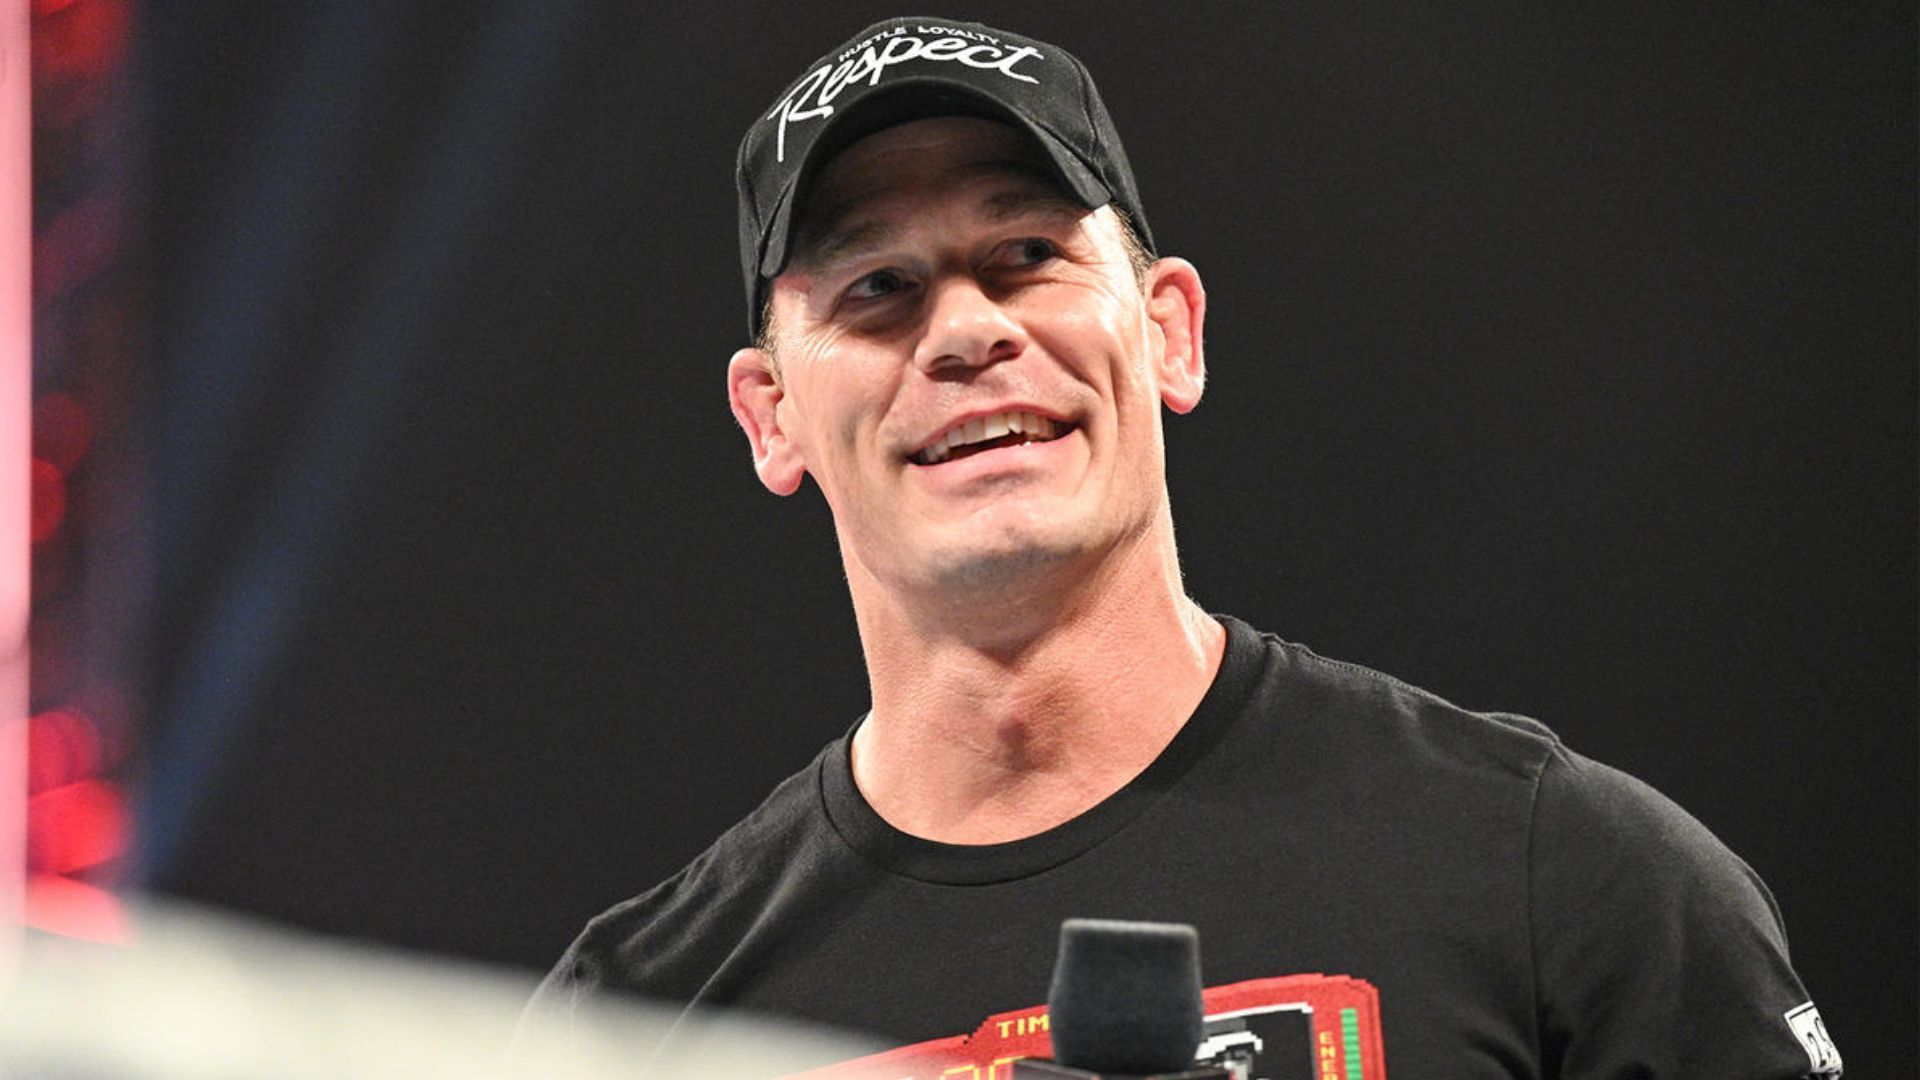 WWE Superstar John Cena during a recent appearance on RAW